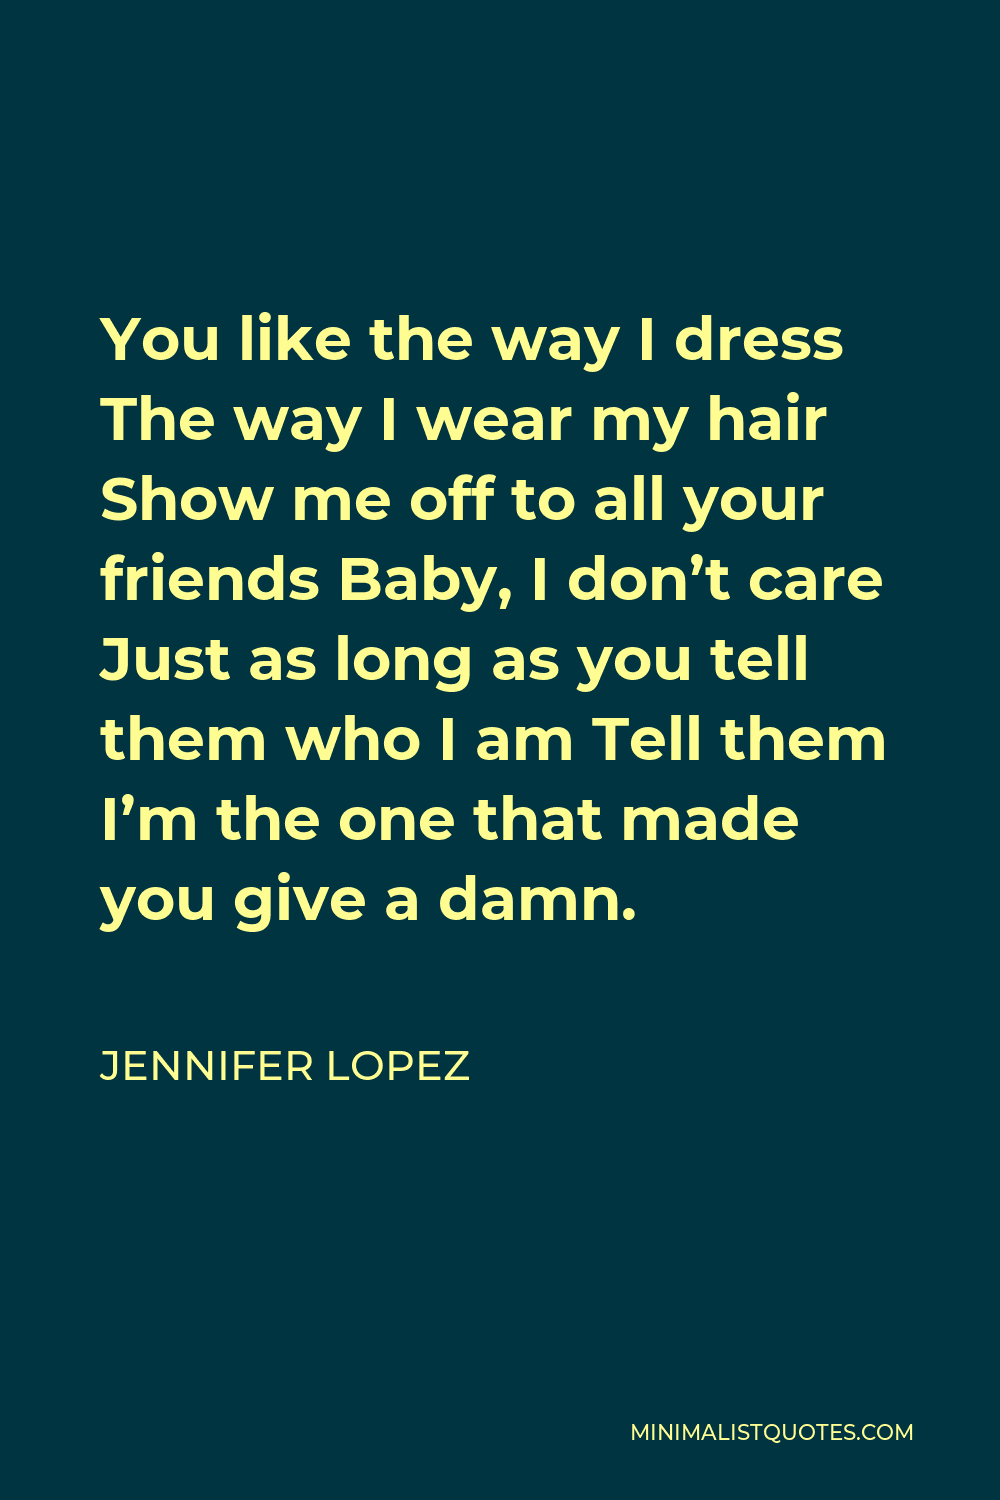 Jennifer Lopez Quote - You like the way I dress The way I wear my hair Show me off to all your friends Baby, I don’t care Just as long as you tell them who I am Tell them I’m the one that made you give a damn.